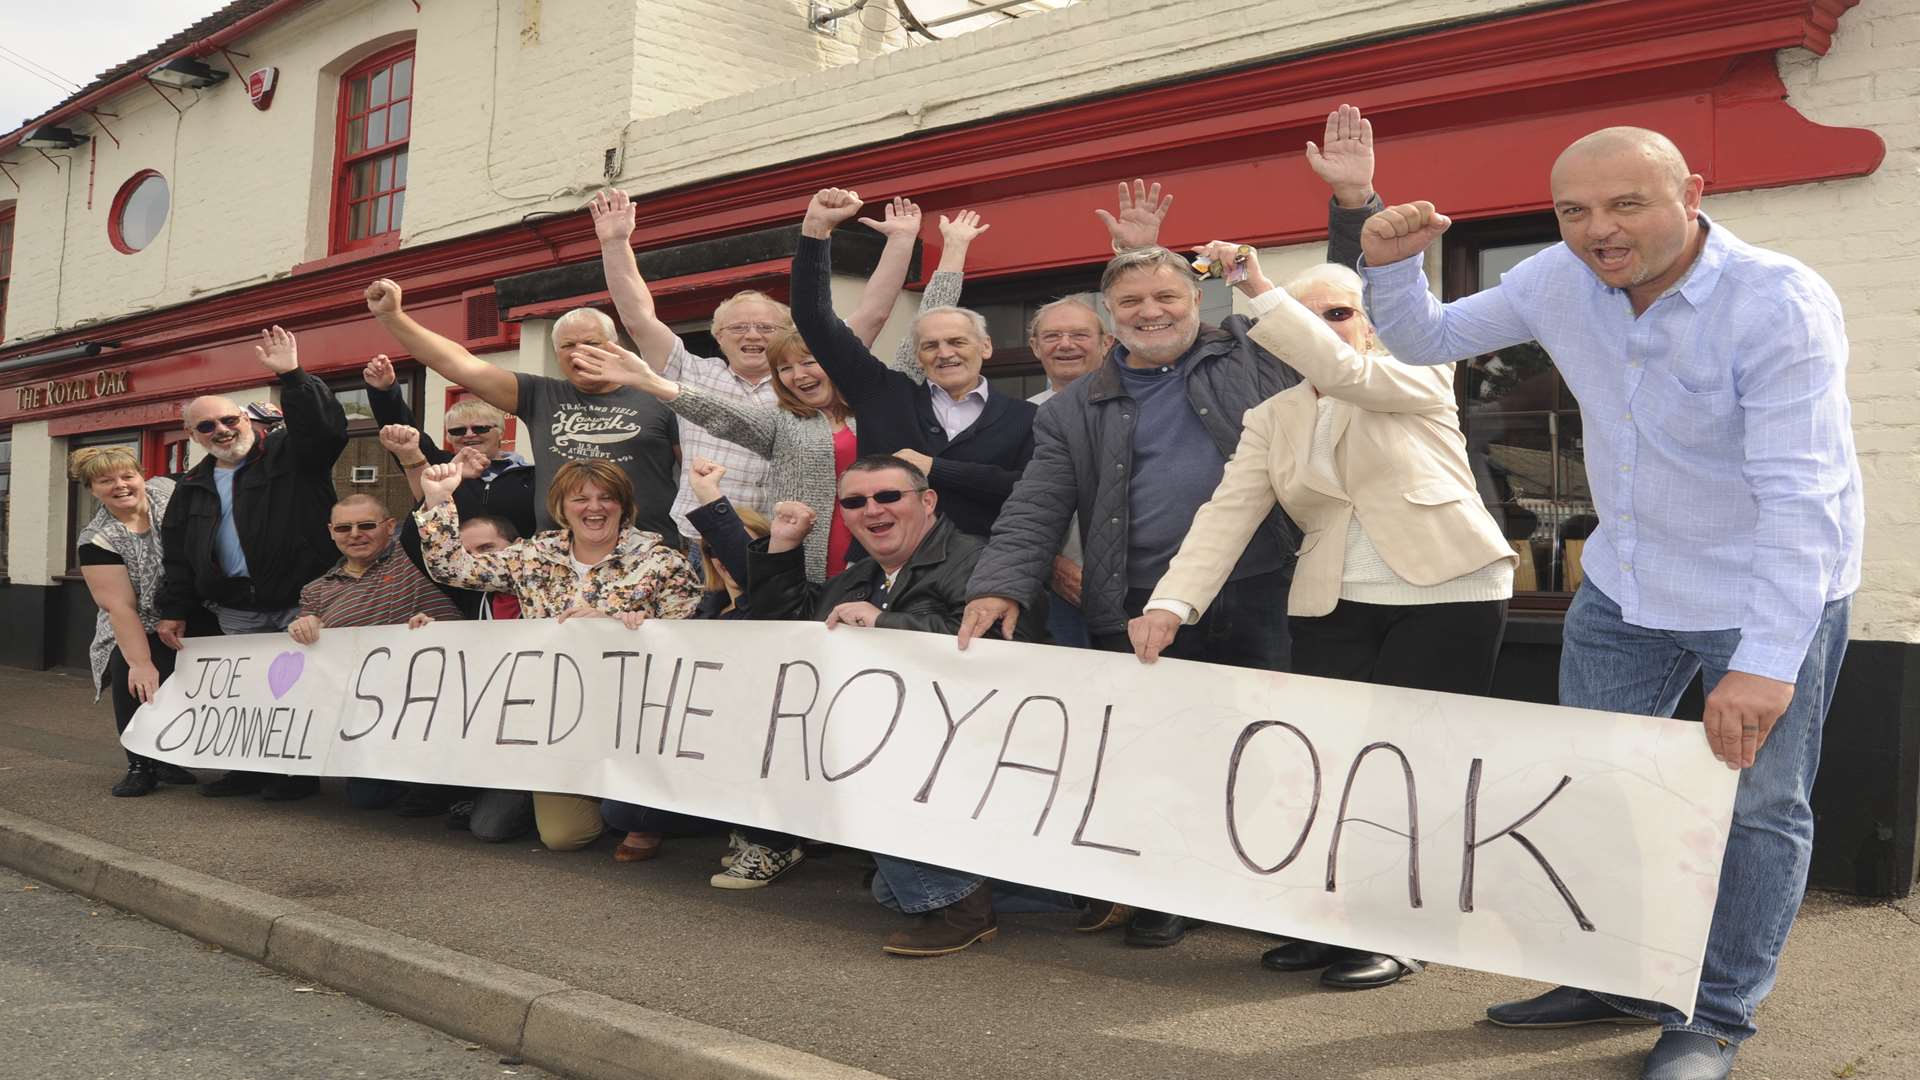 Campaigners outside The Royal Oak in Cooling Road, Frindsbury